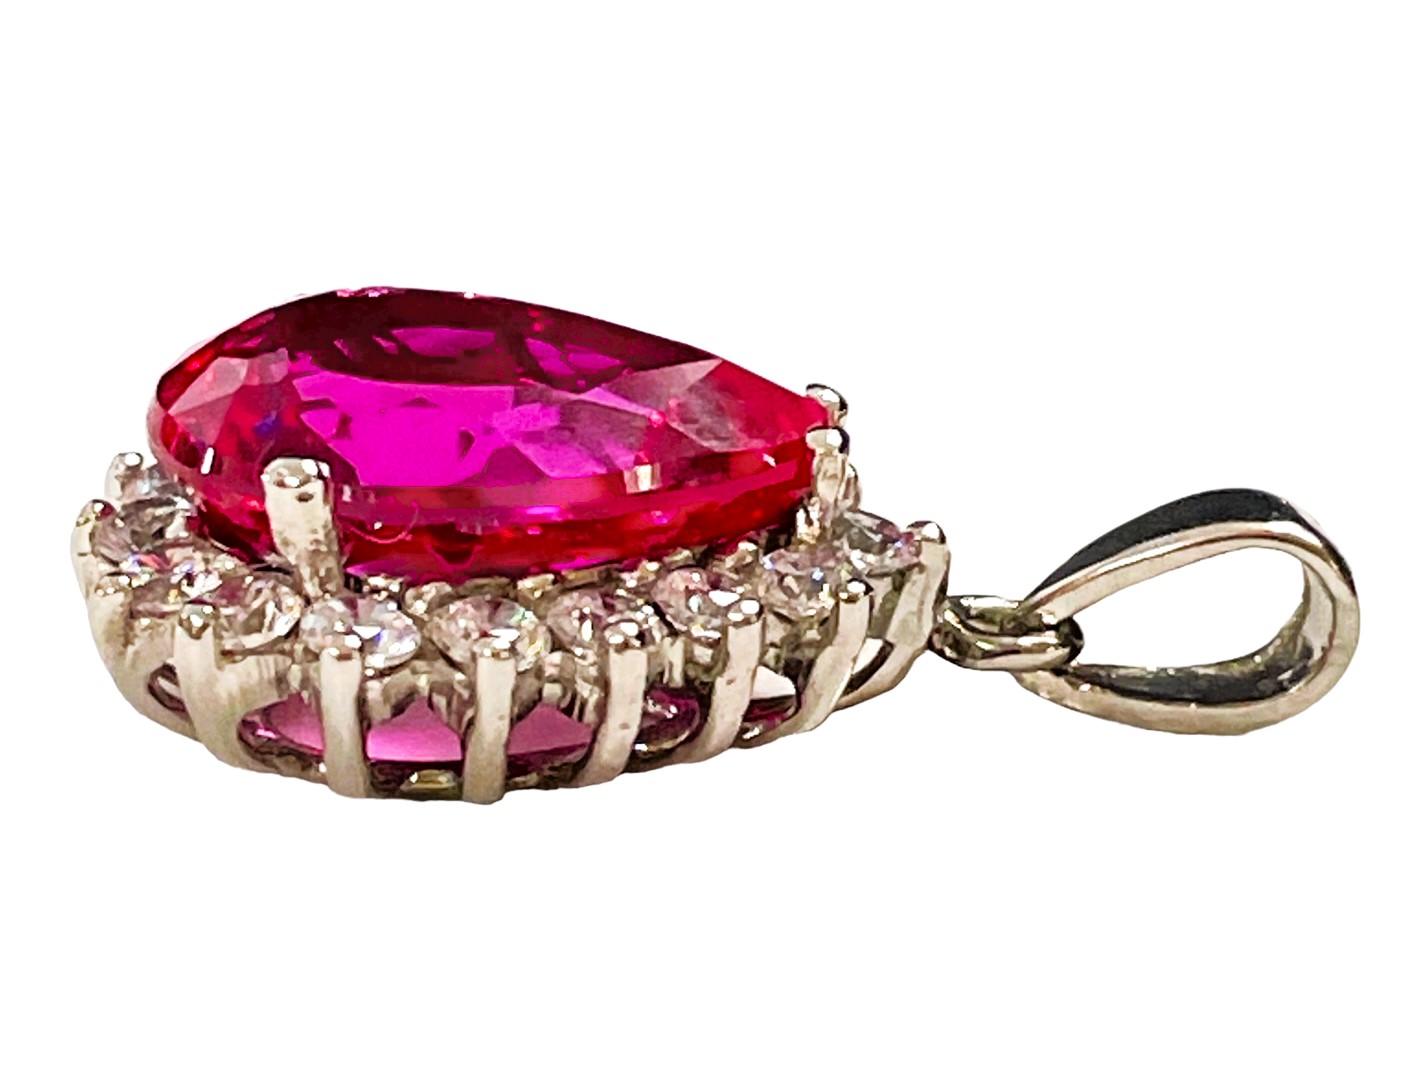 Women's New African 8.7 Carat Raspberry Topaz and White Sapphire Sterling Pendant For Sale